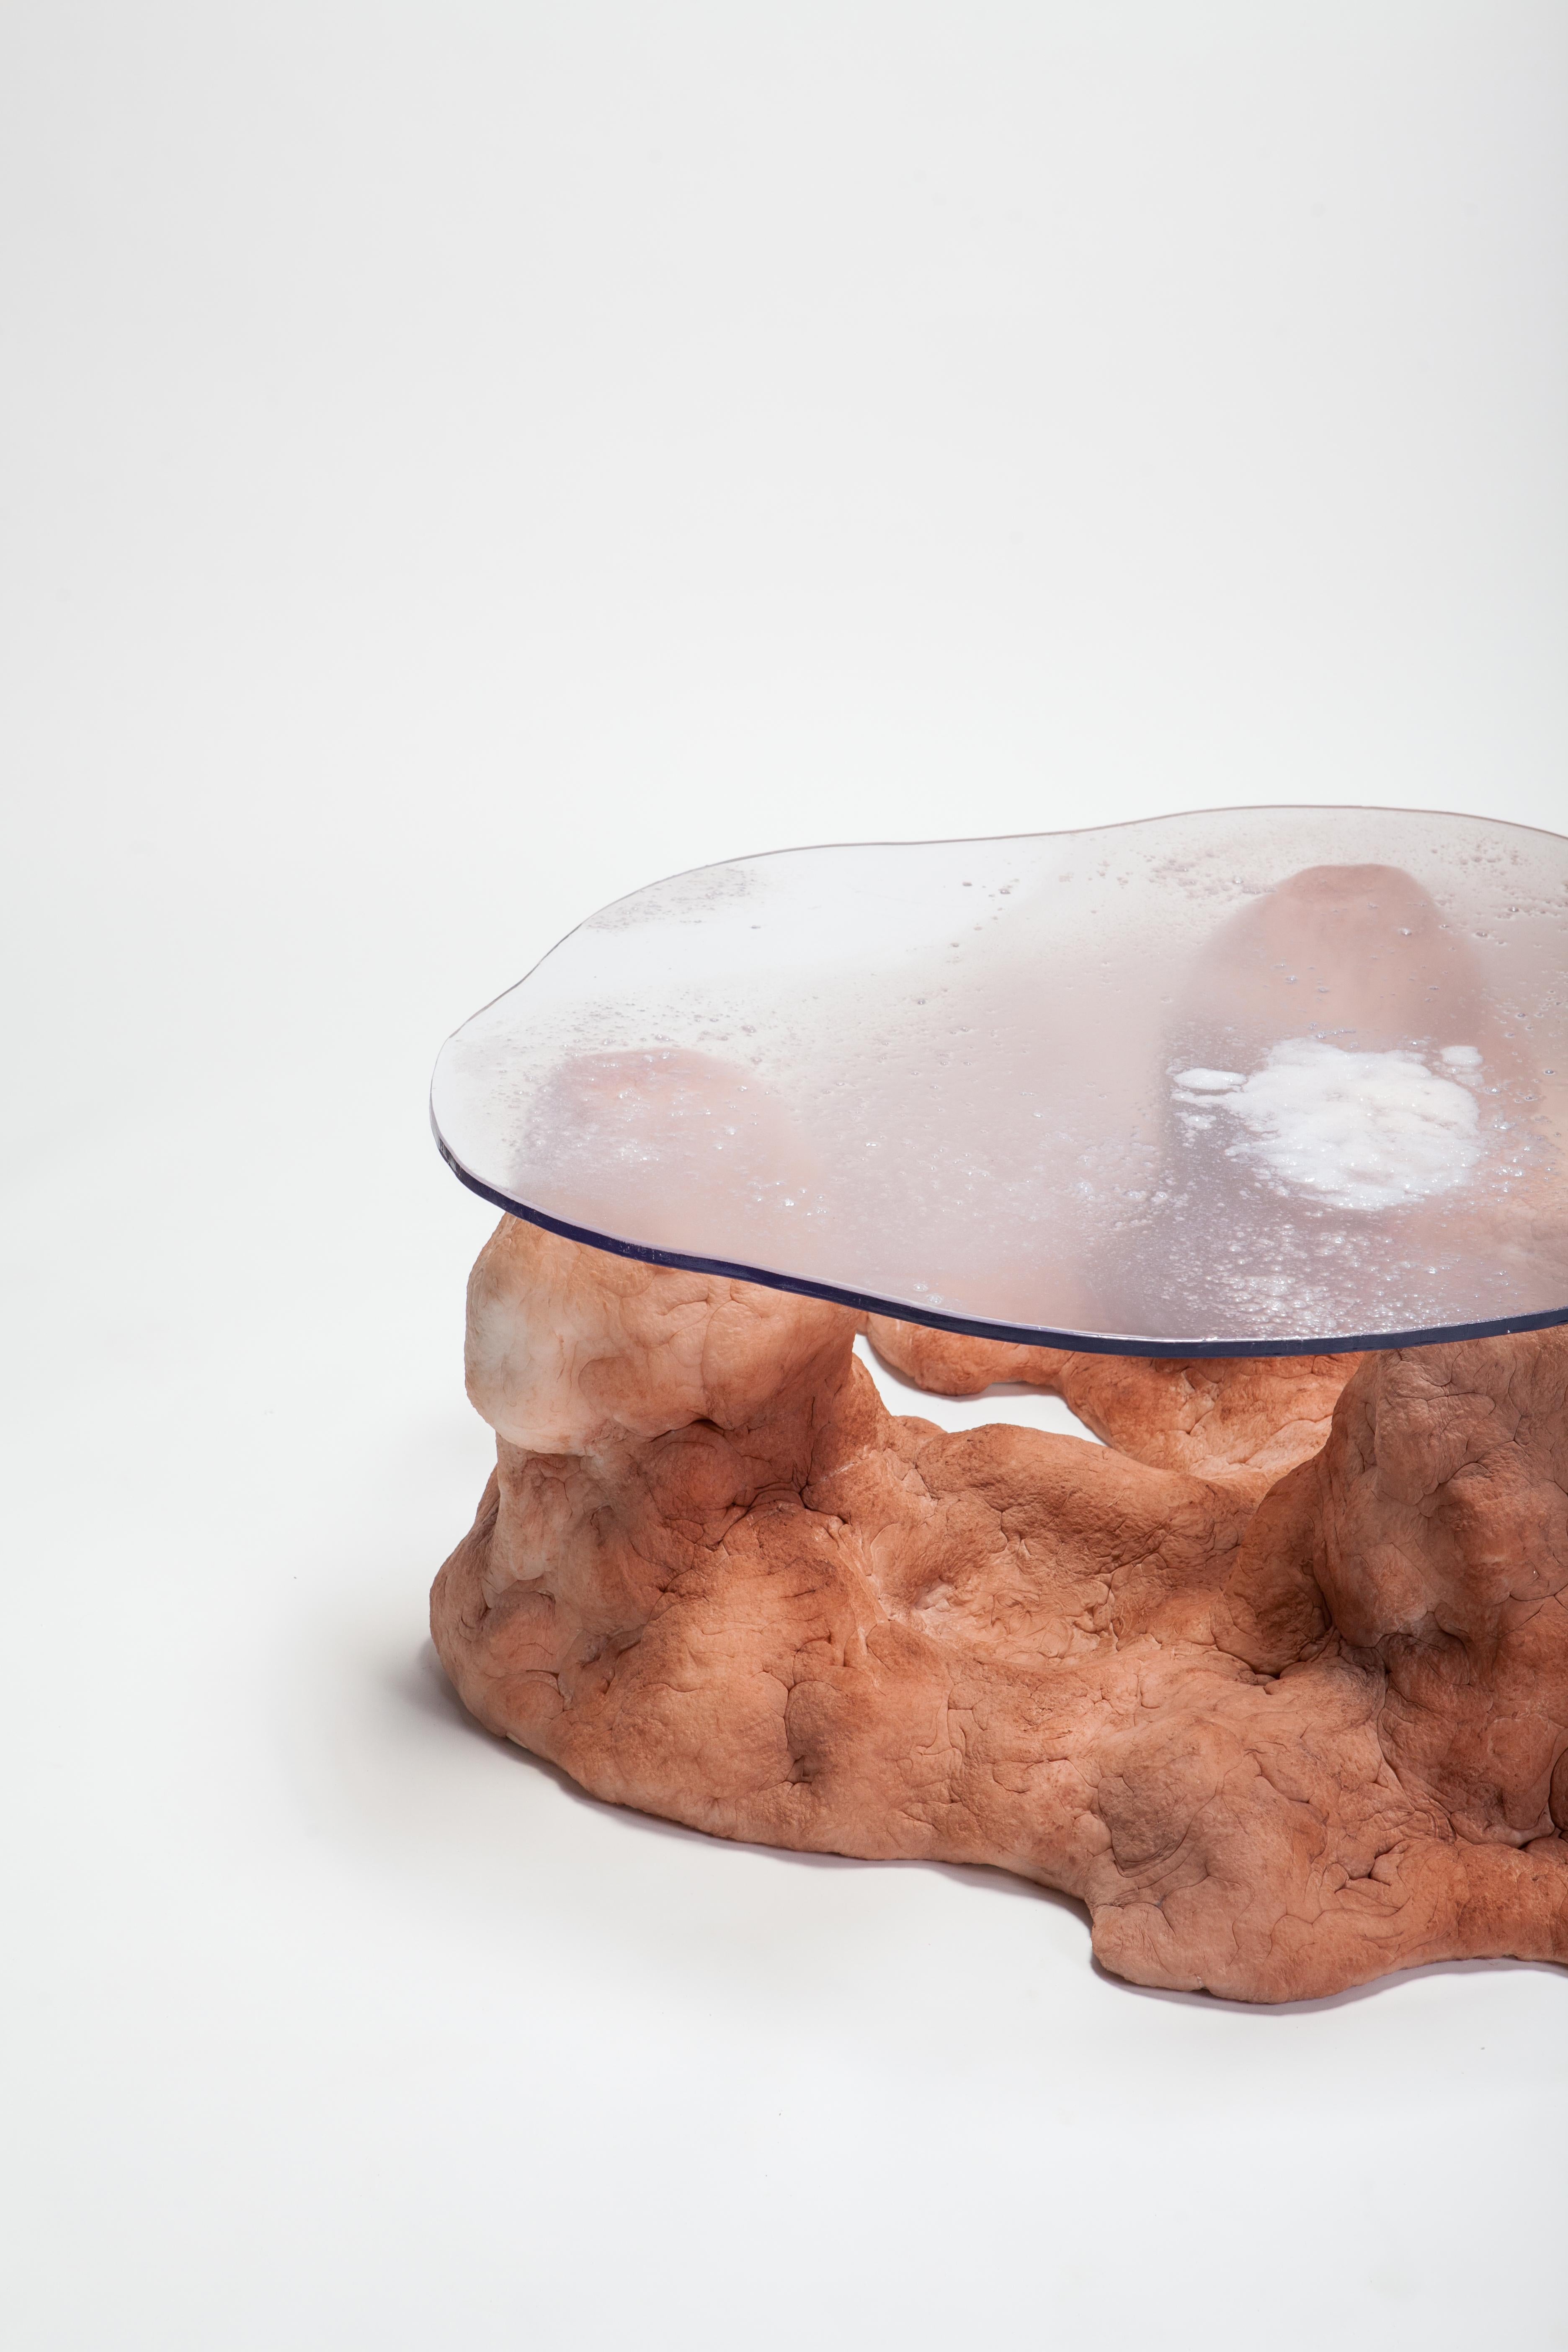 European Gully Coffee Table by Elissa Lacoste for Everyday Gallery, 2019